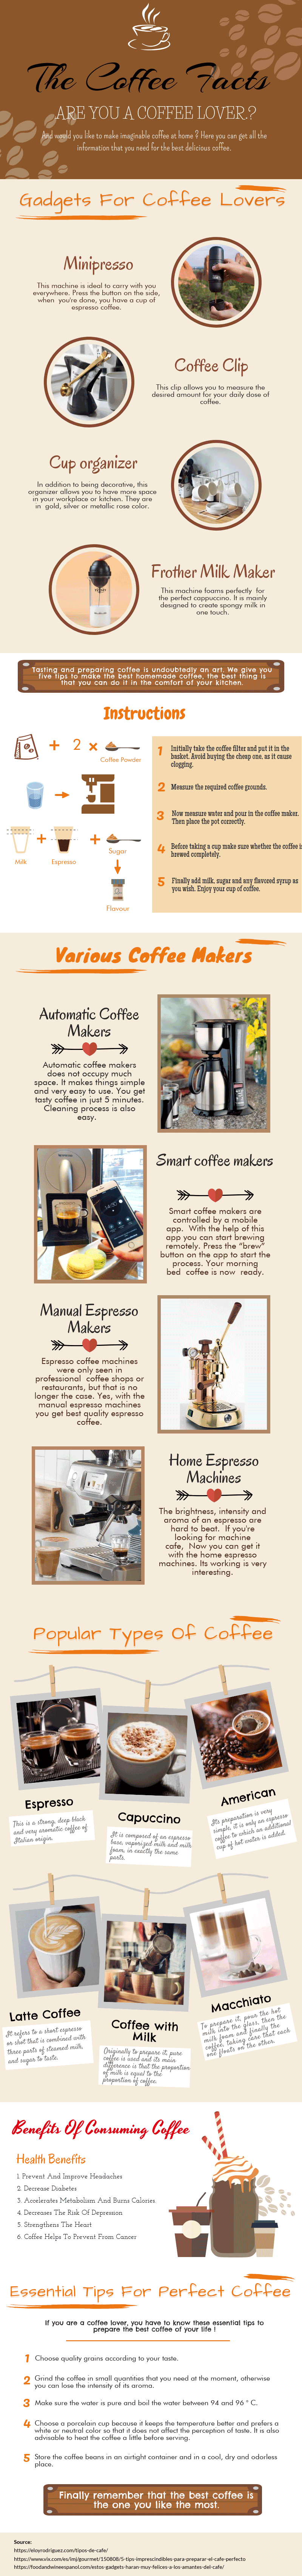 Best Coffee Makers in 2019